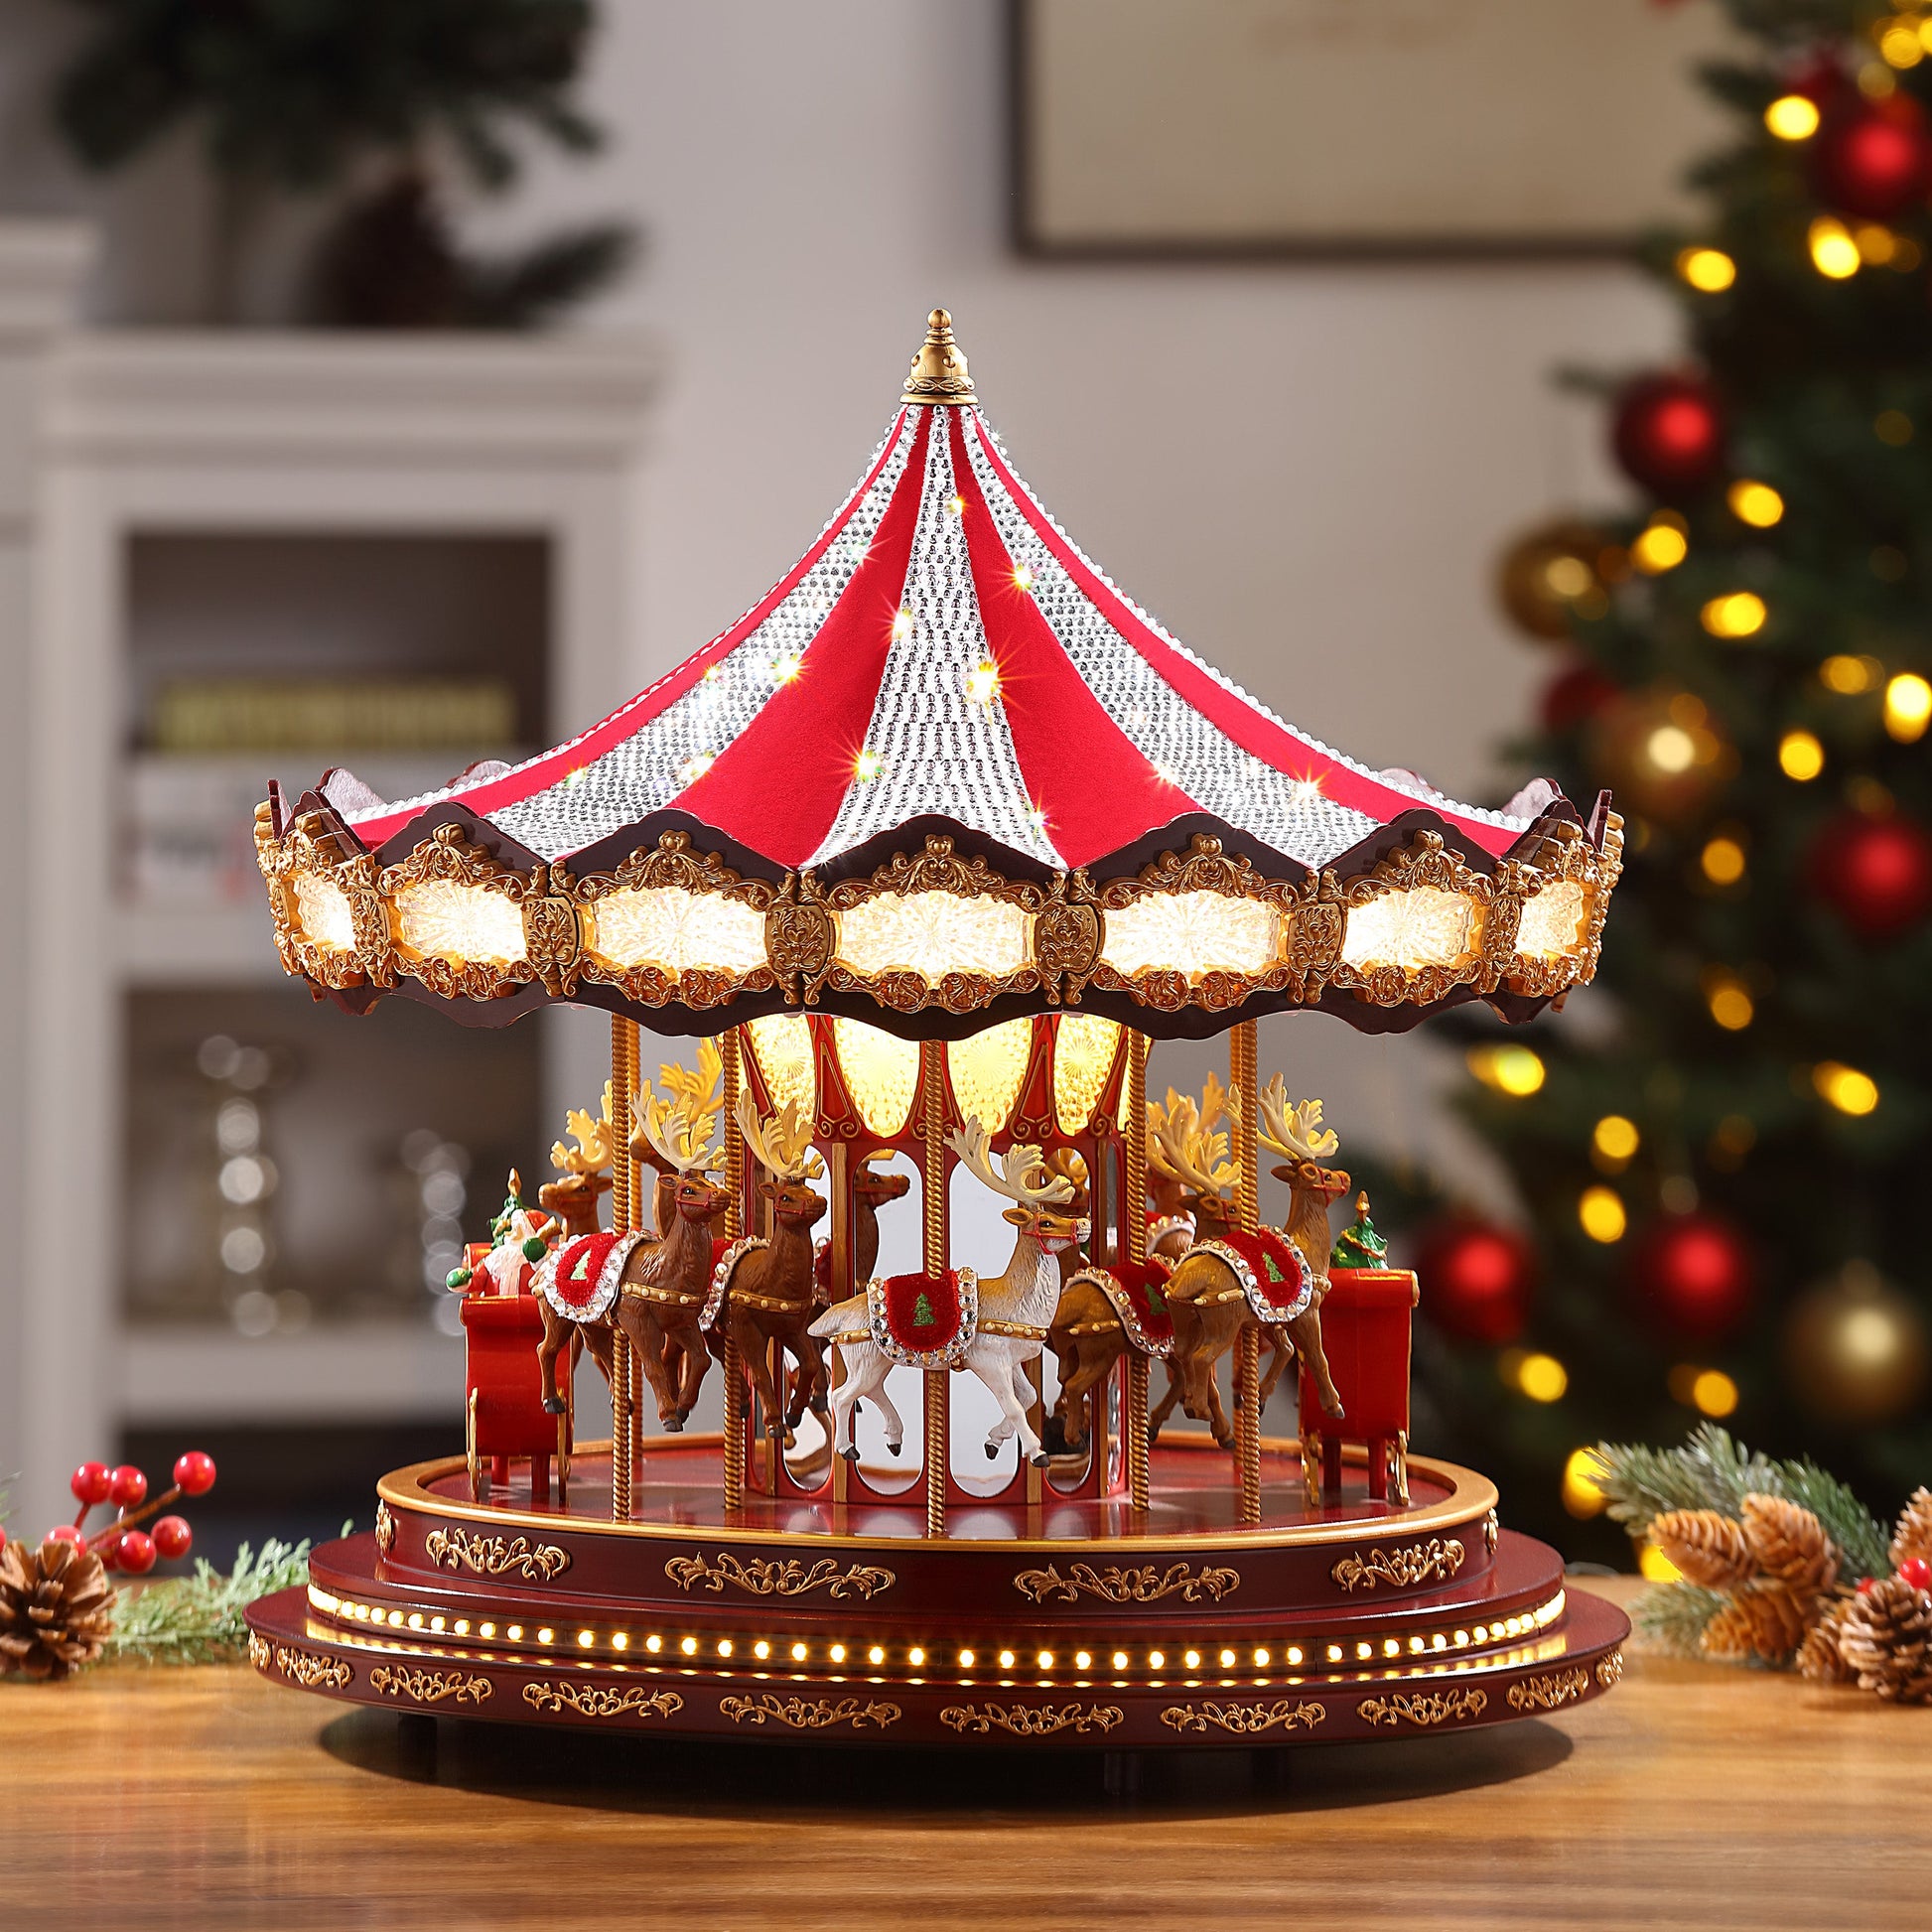 17" Deluxe Crystal Carousel - Mr. Christmas